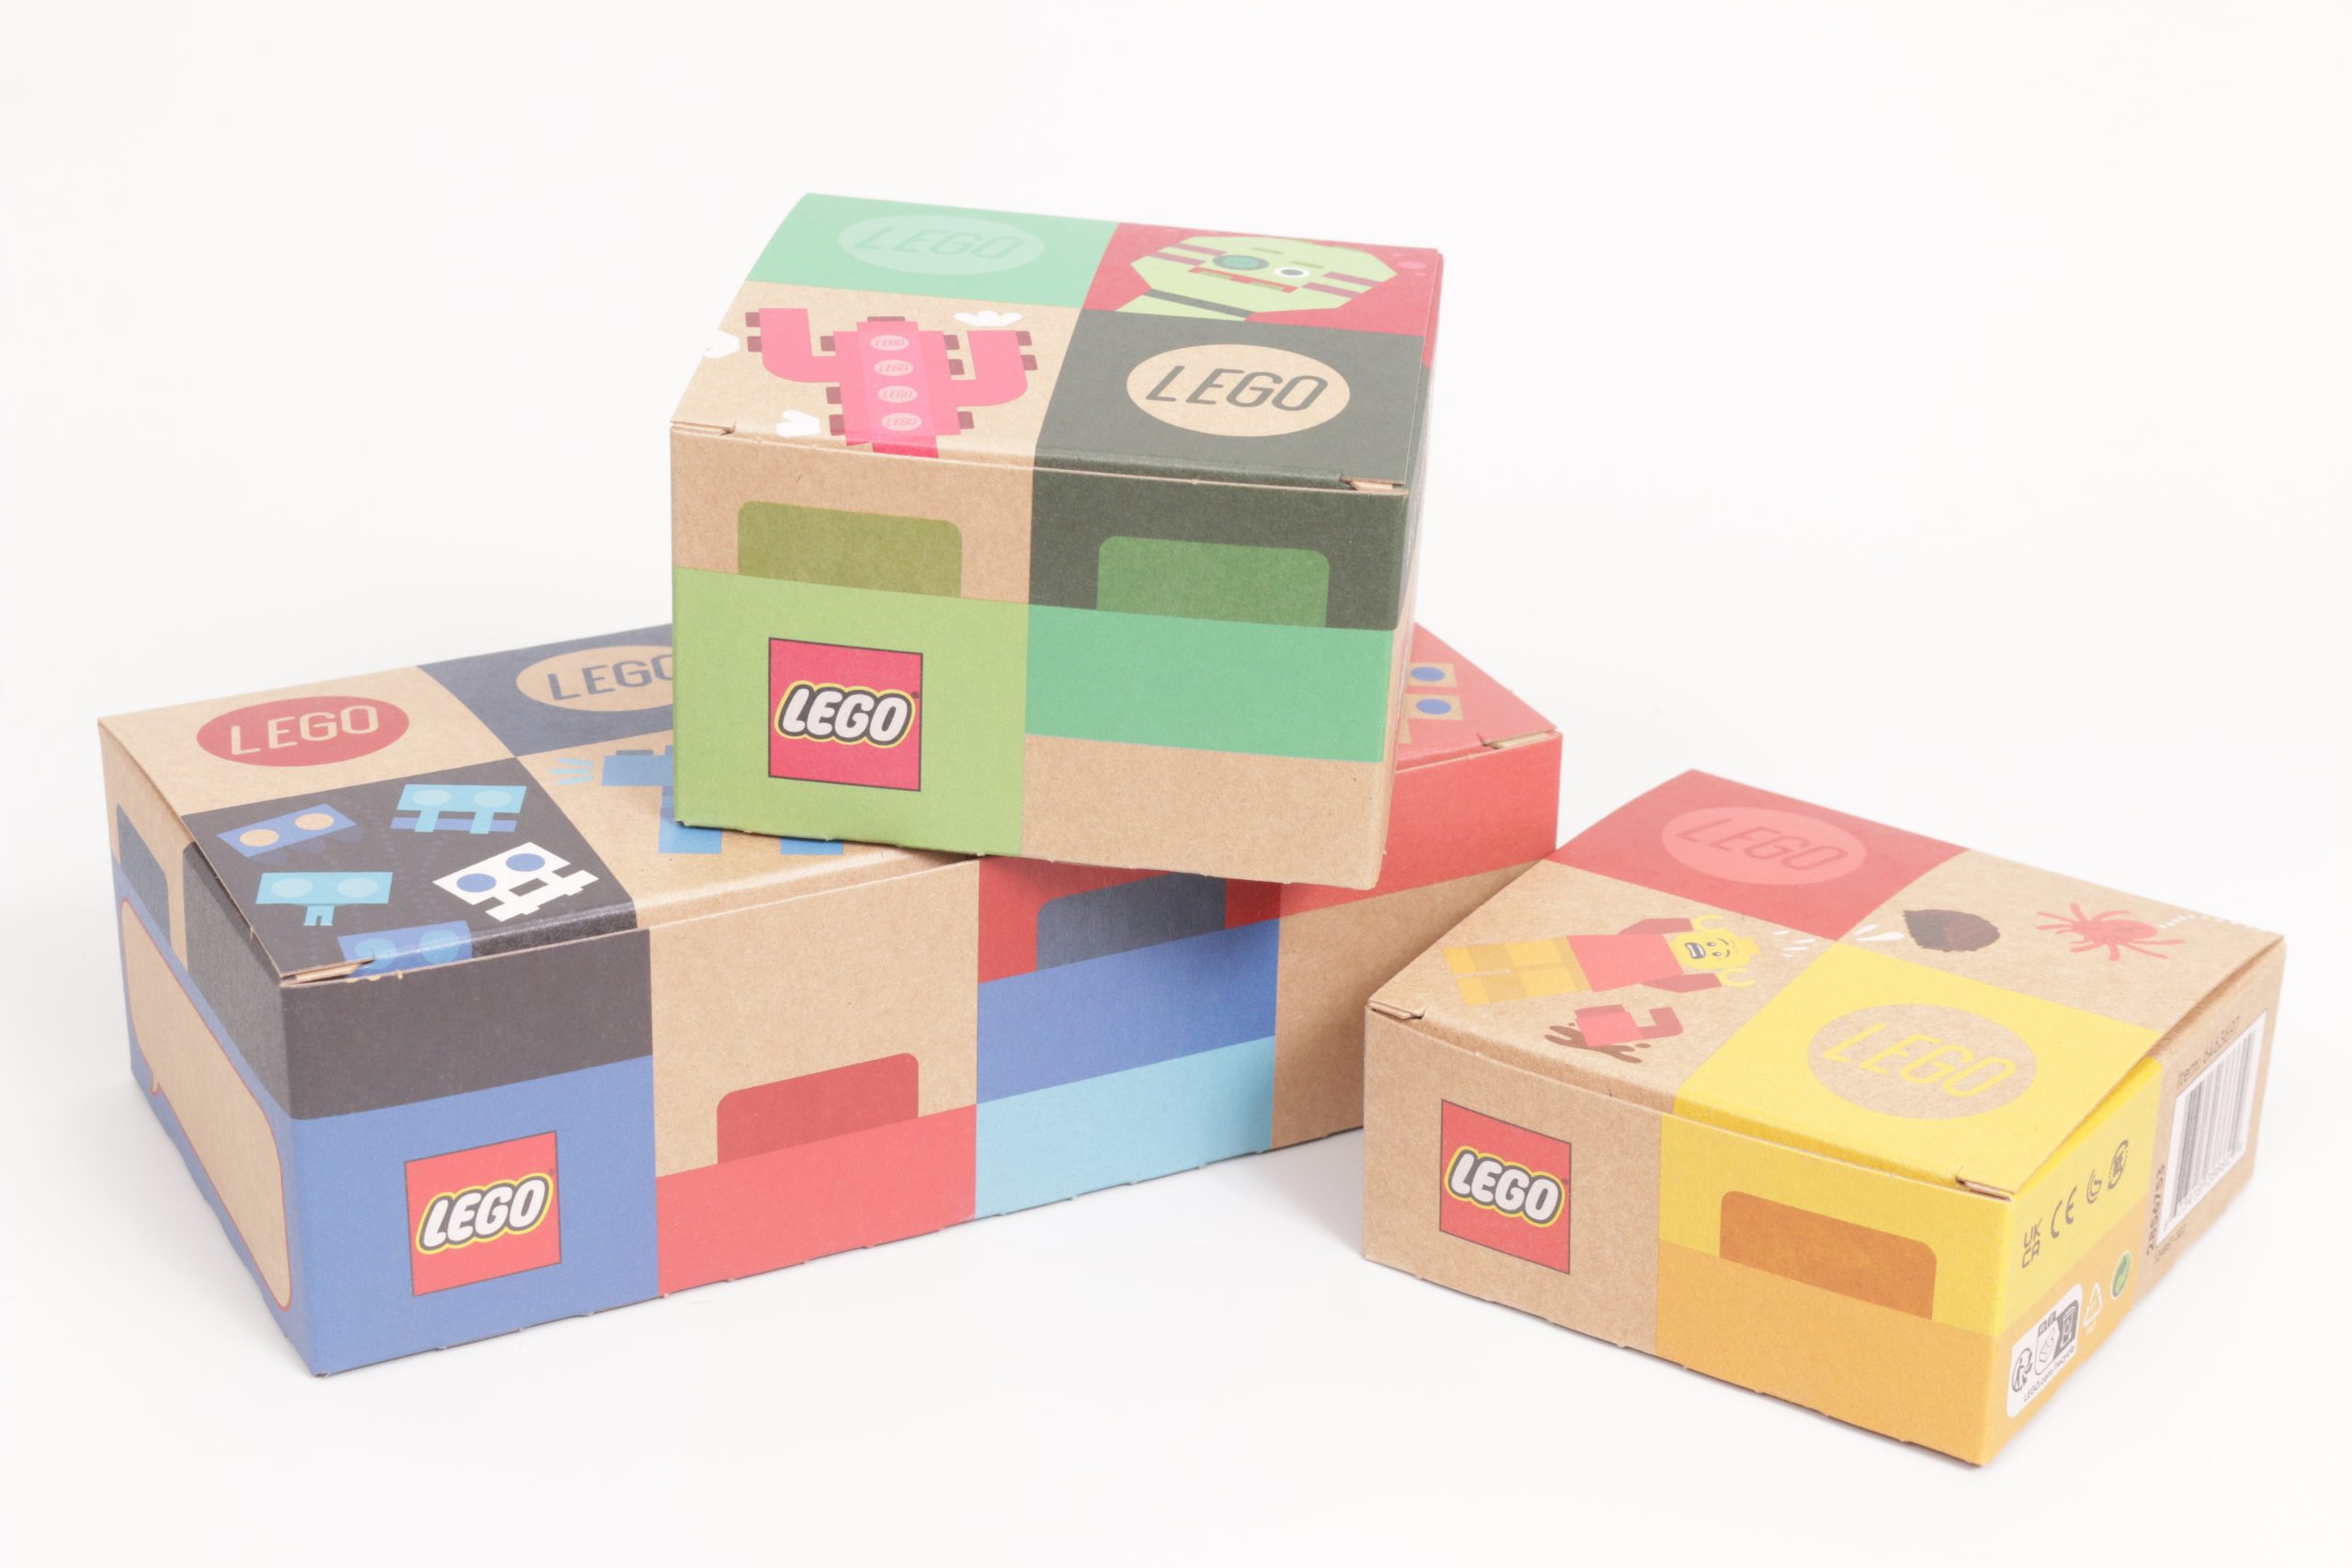 create the design of the packaging of your lego box